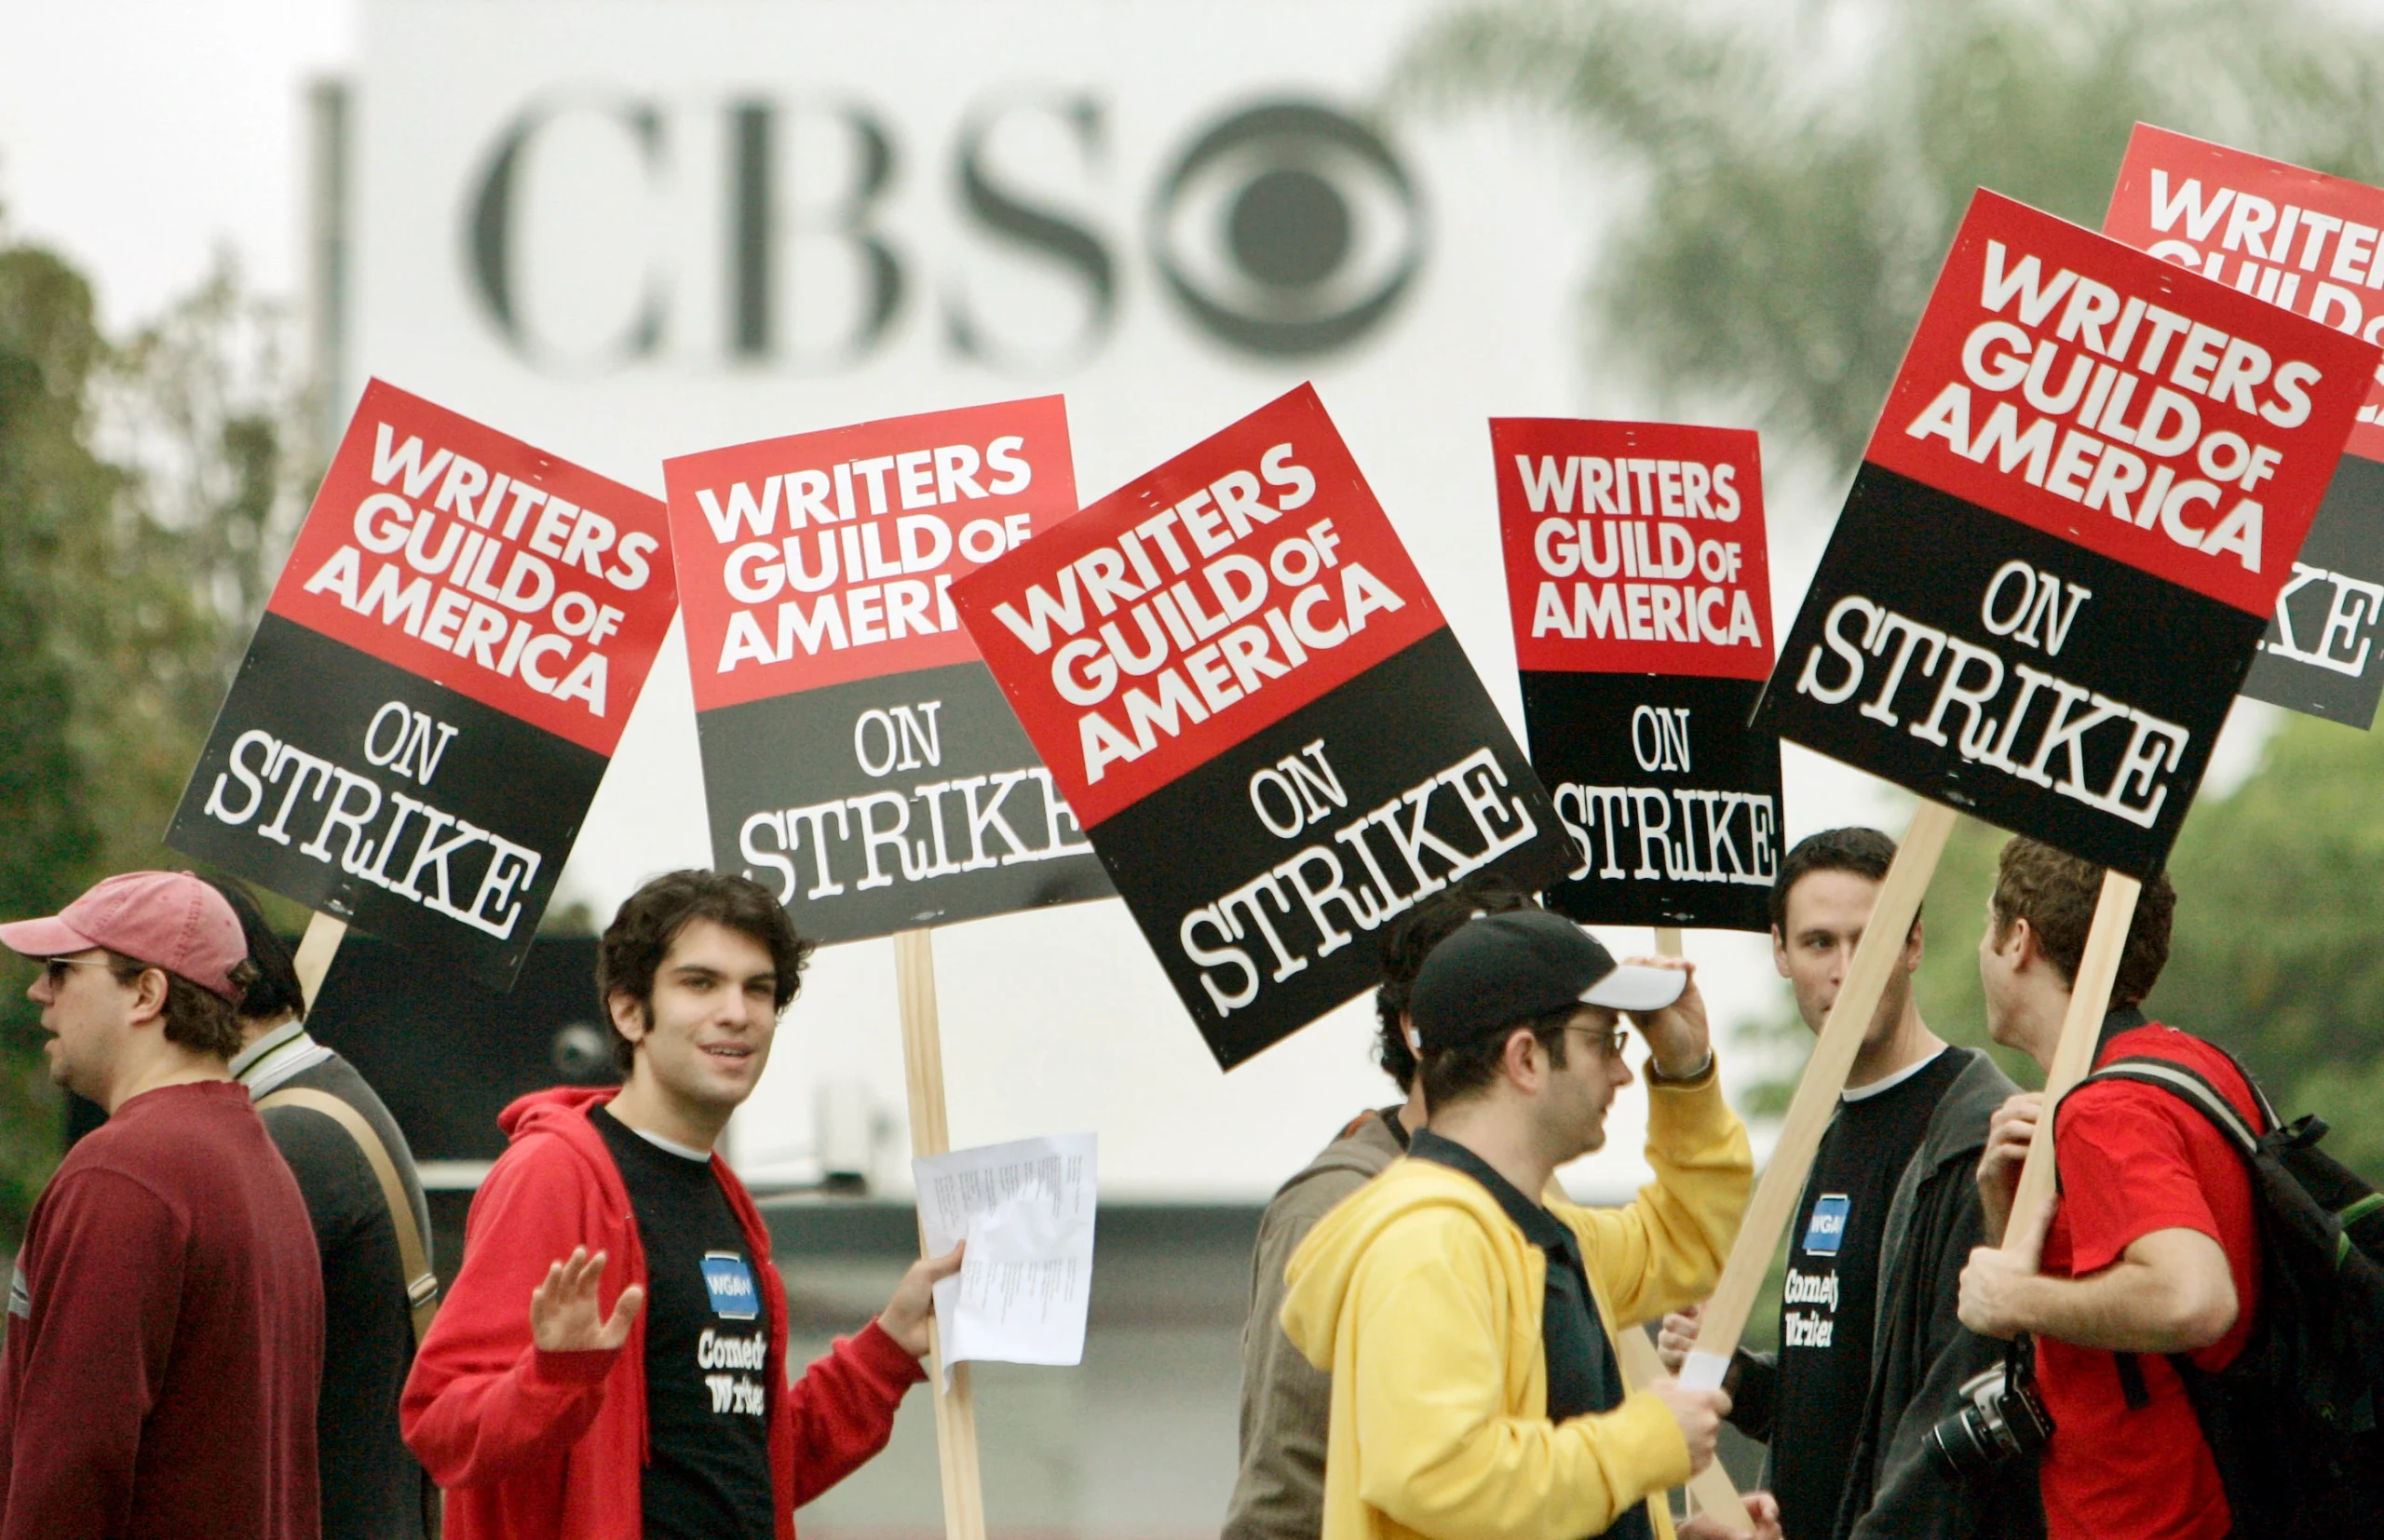 Hollywood screenwriters go on strike over pay; Late night shows to go dark